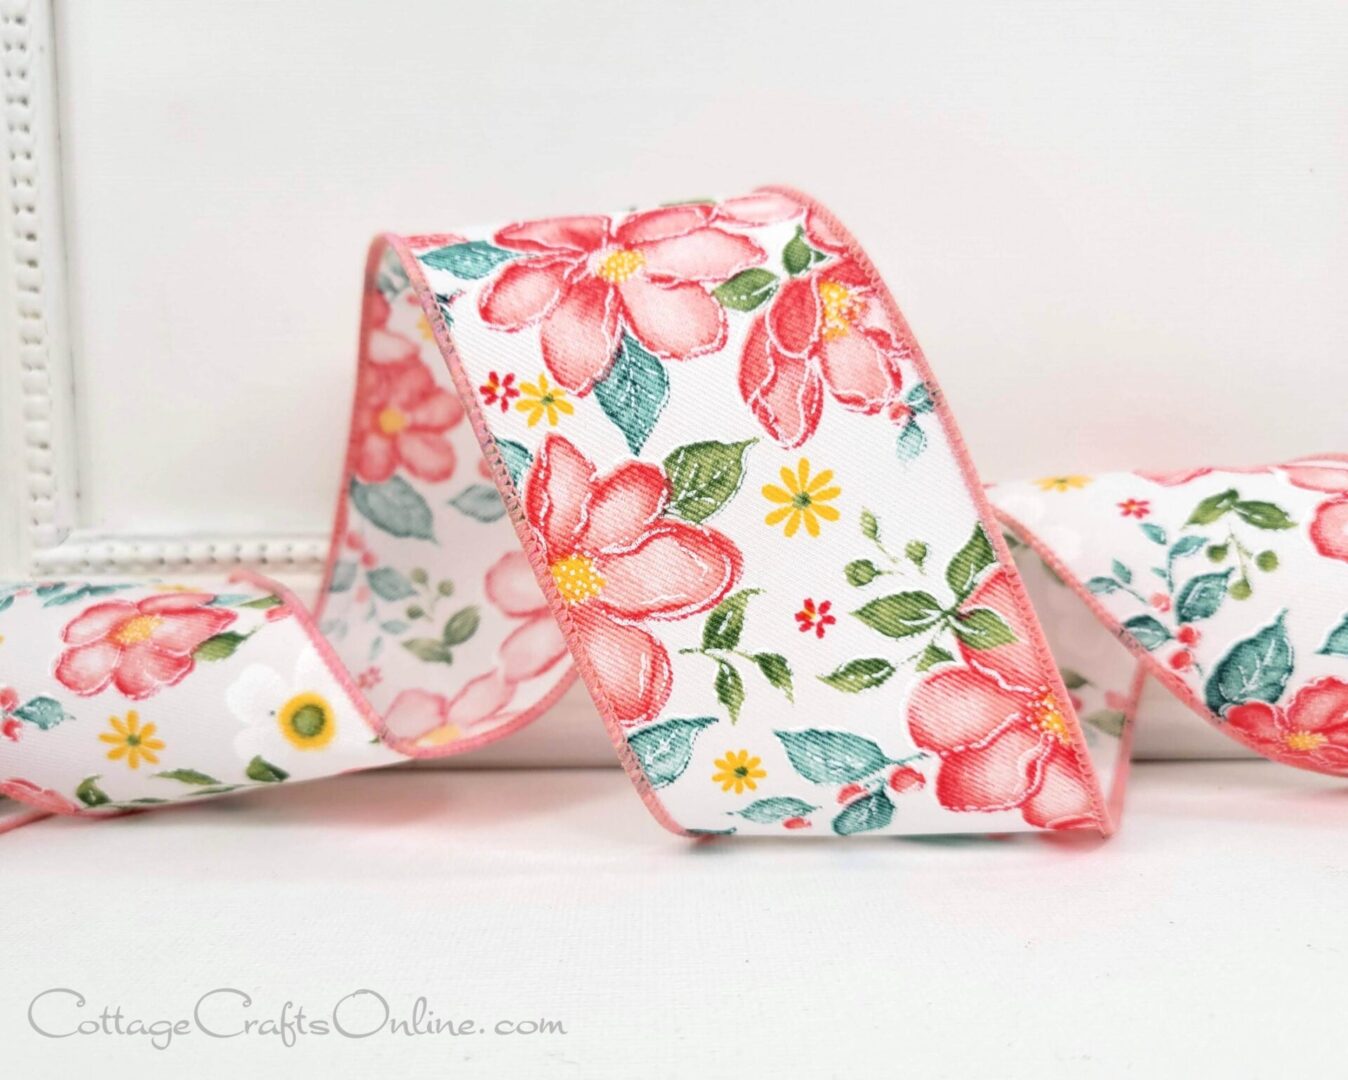 A close up of a ribbon with flowers on it